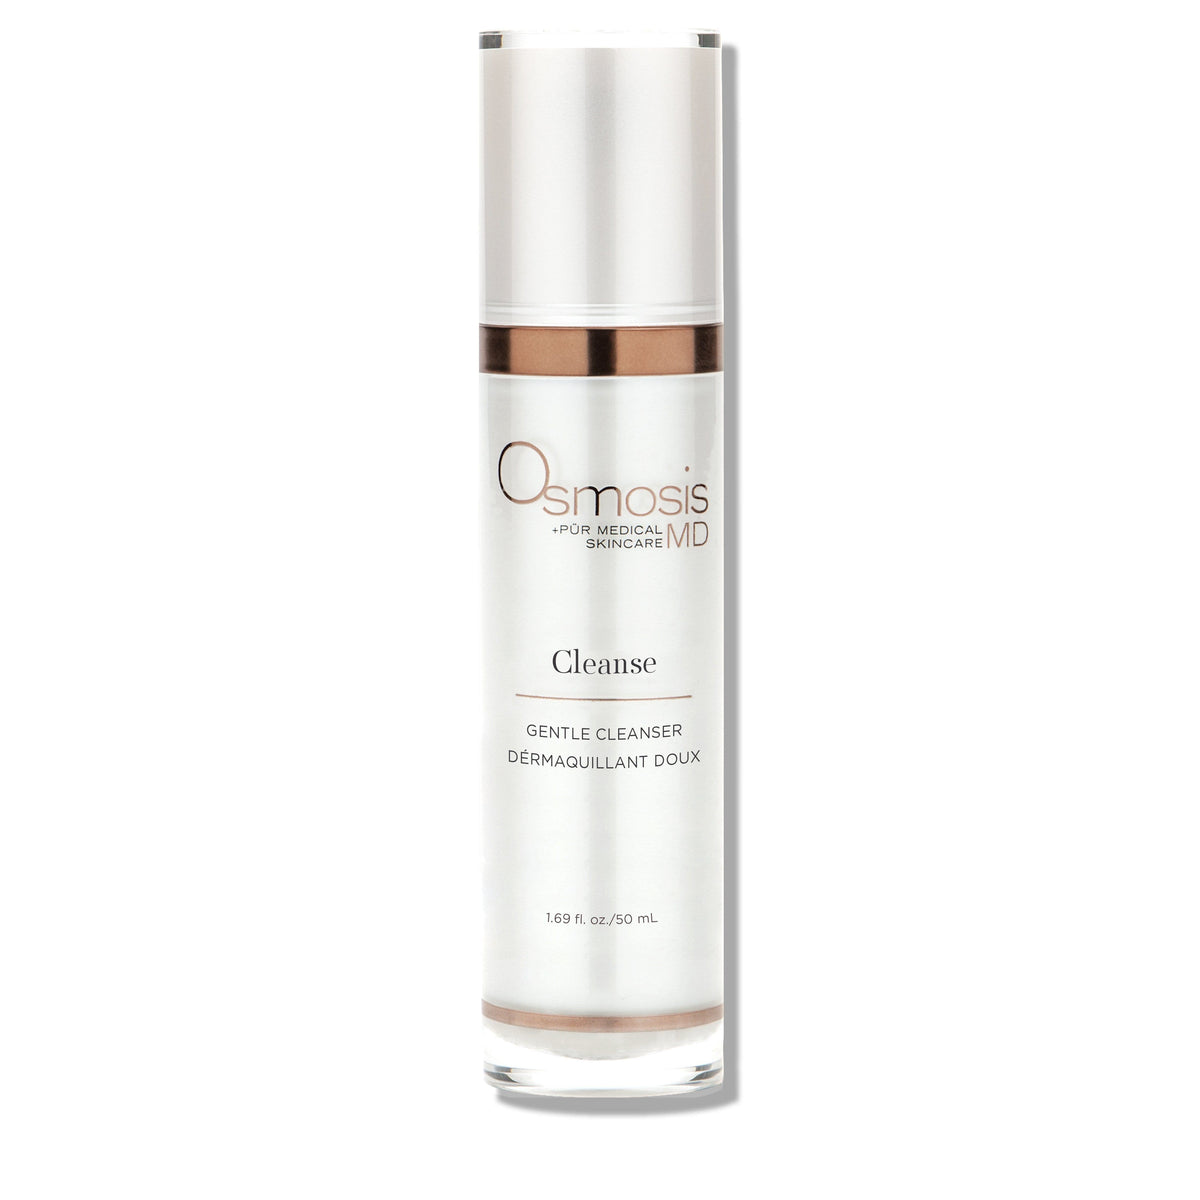 Osmosis MD Cleanse Gentle Cleanser 1.69 fl oz